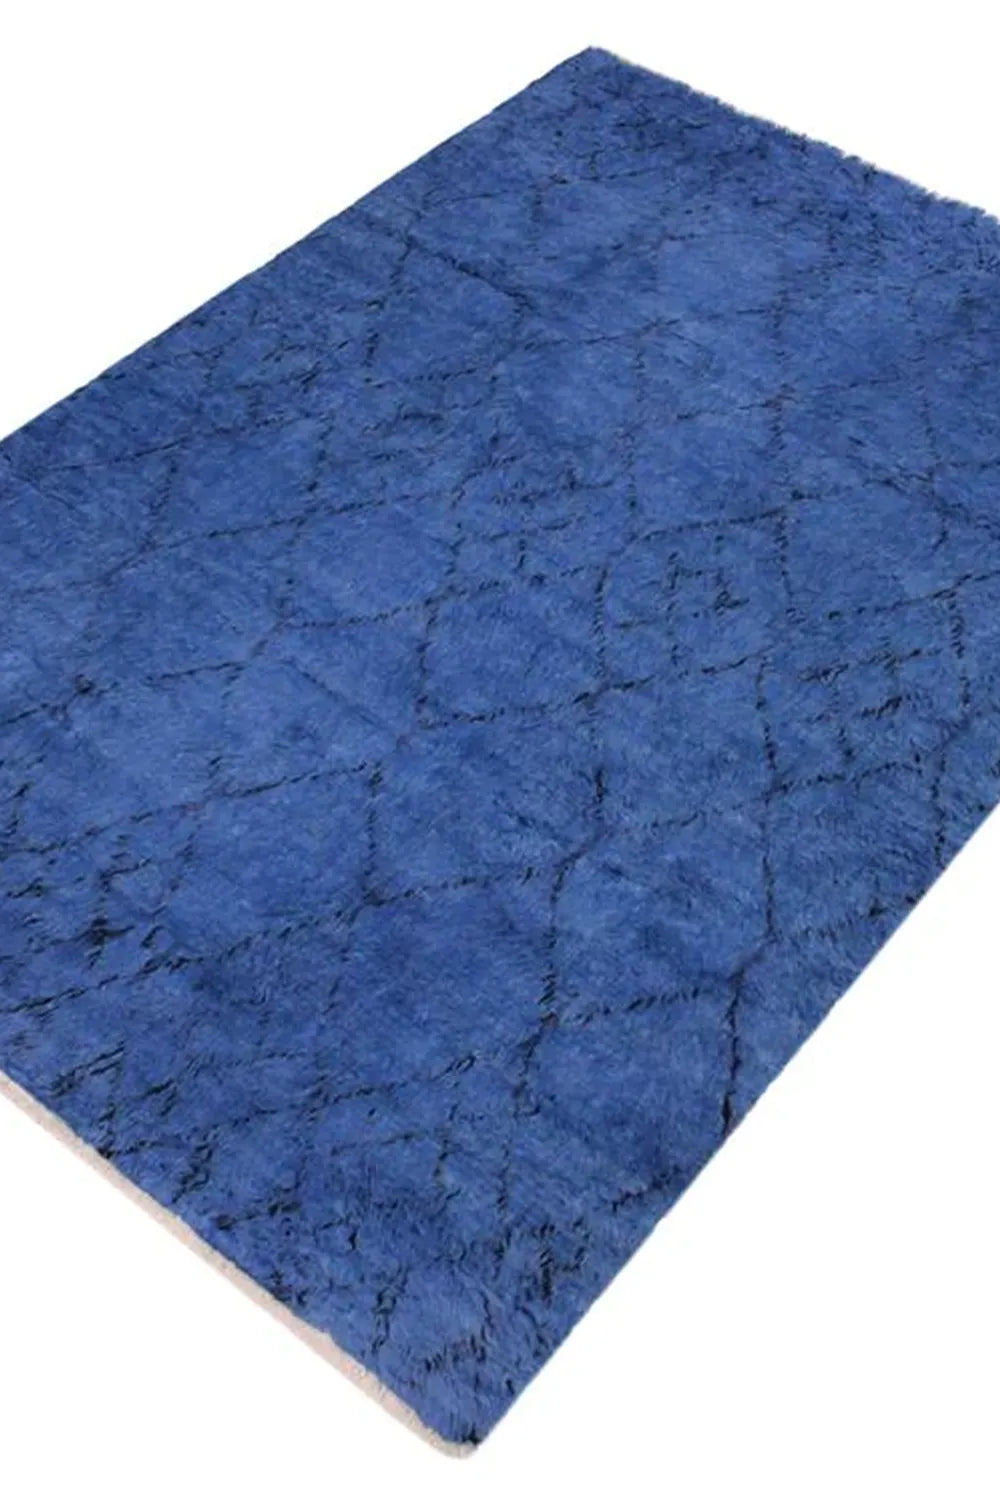 Contemporary Hand-Knotted Geometric Blue Shag Rug in 3x5 Size for Cozy Spaces